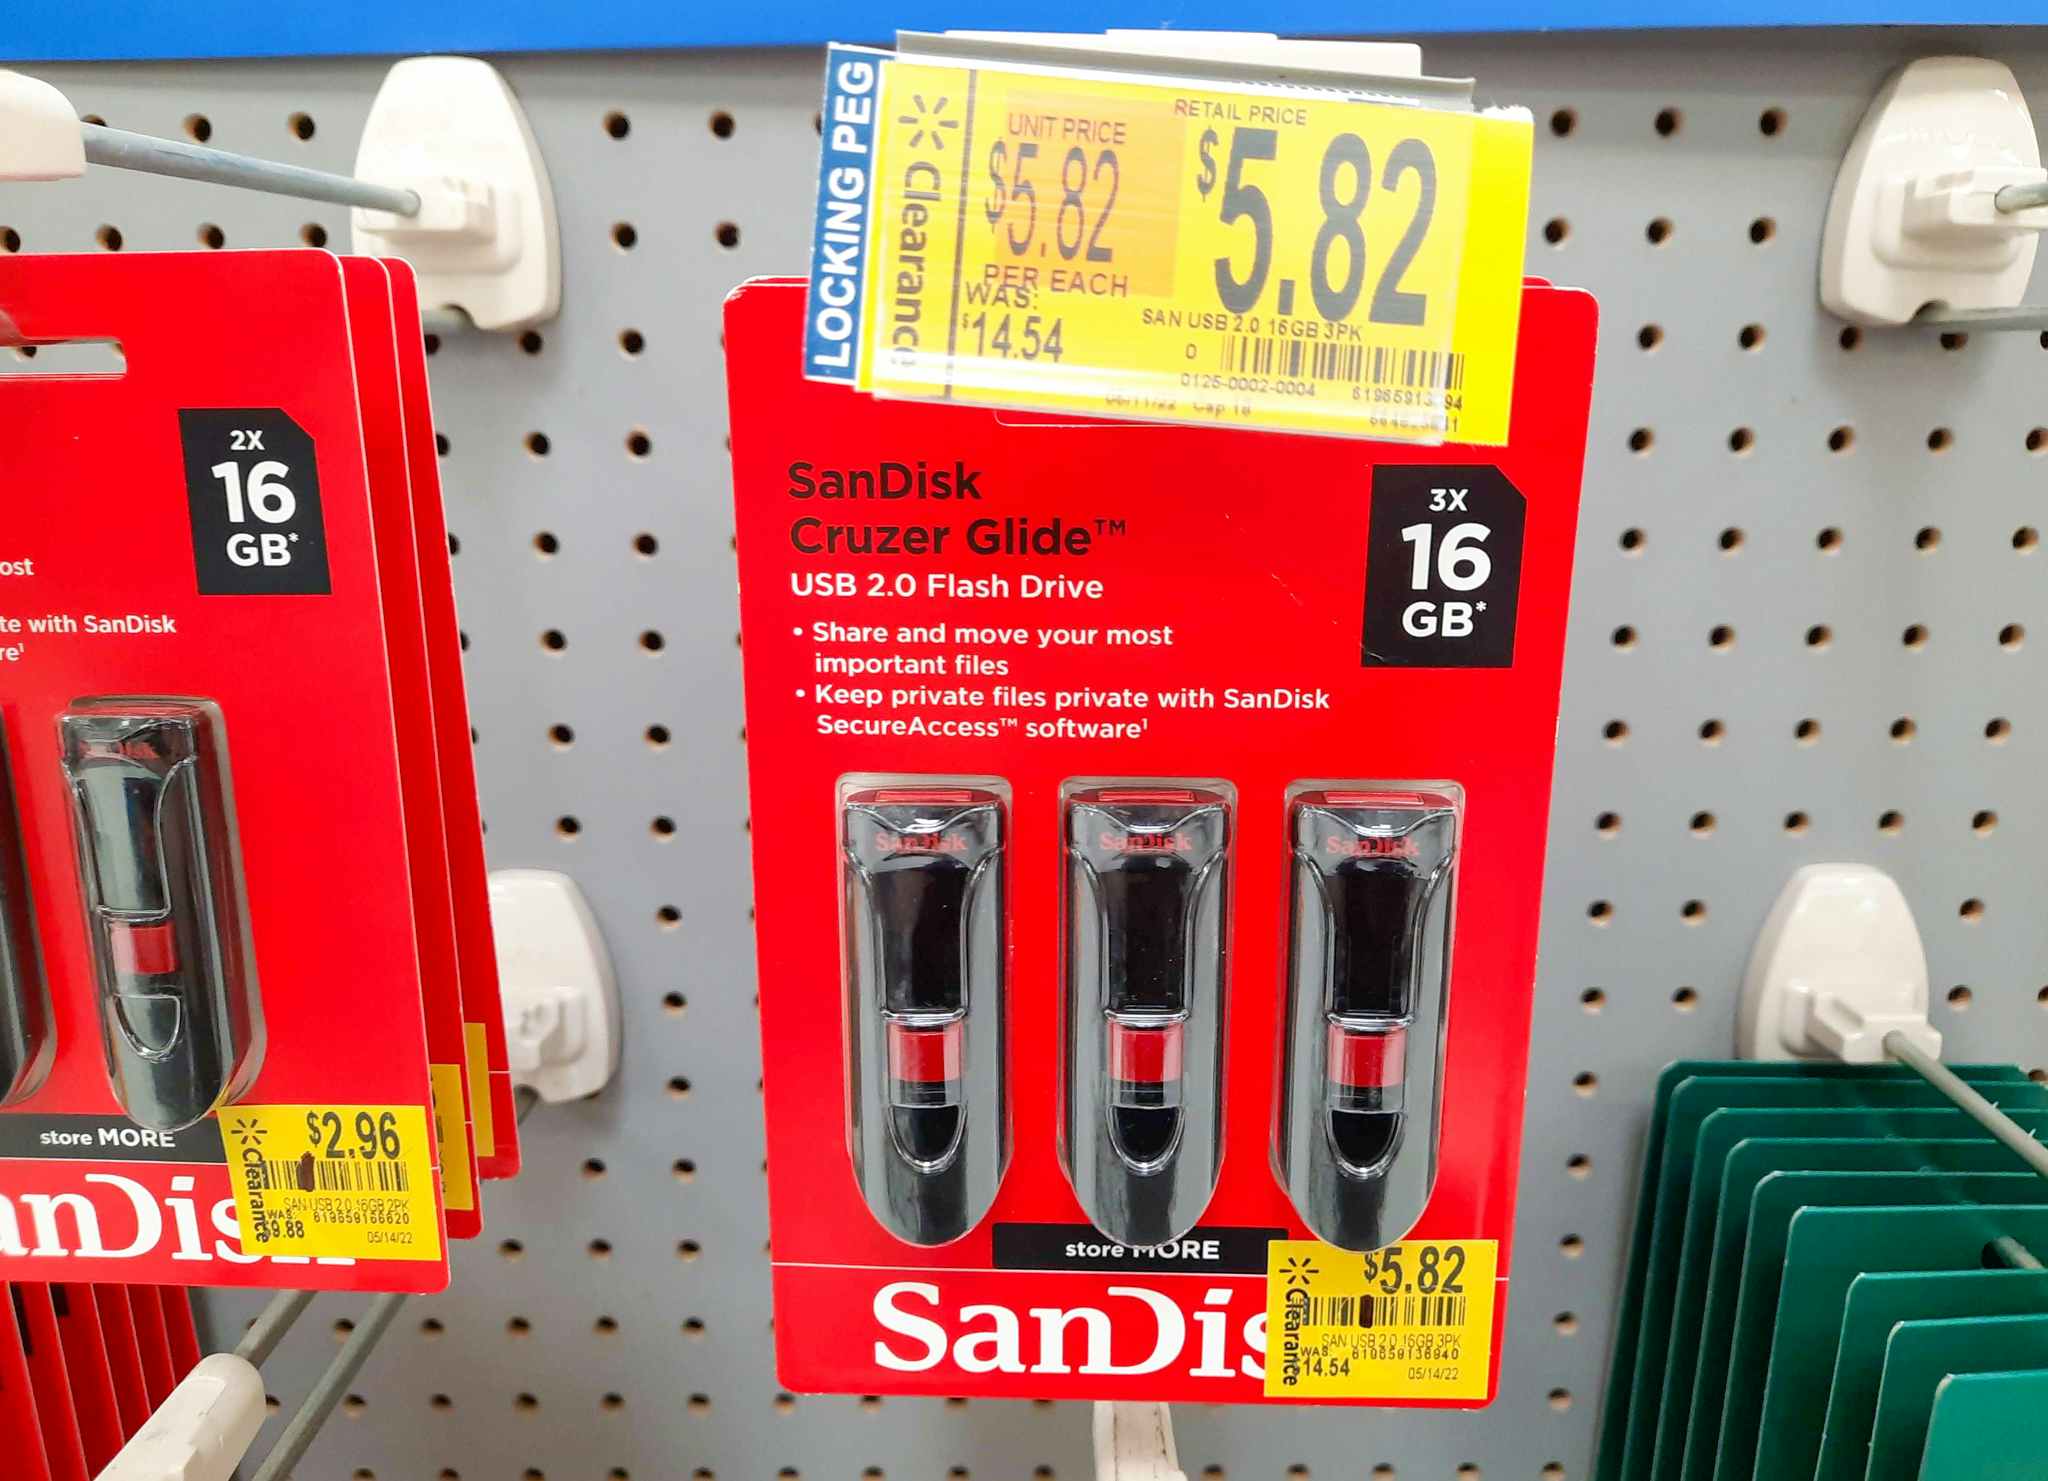 Sandisk Flash Drives on Clearance at Walmart